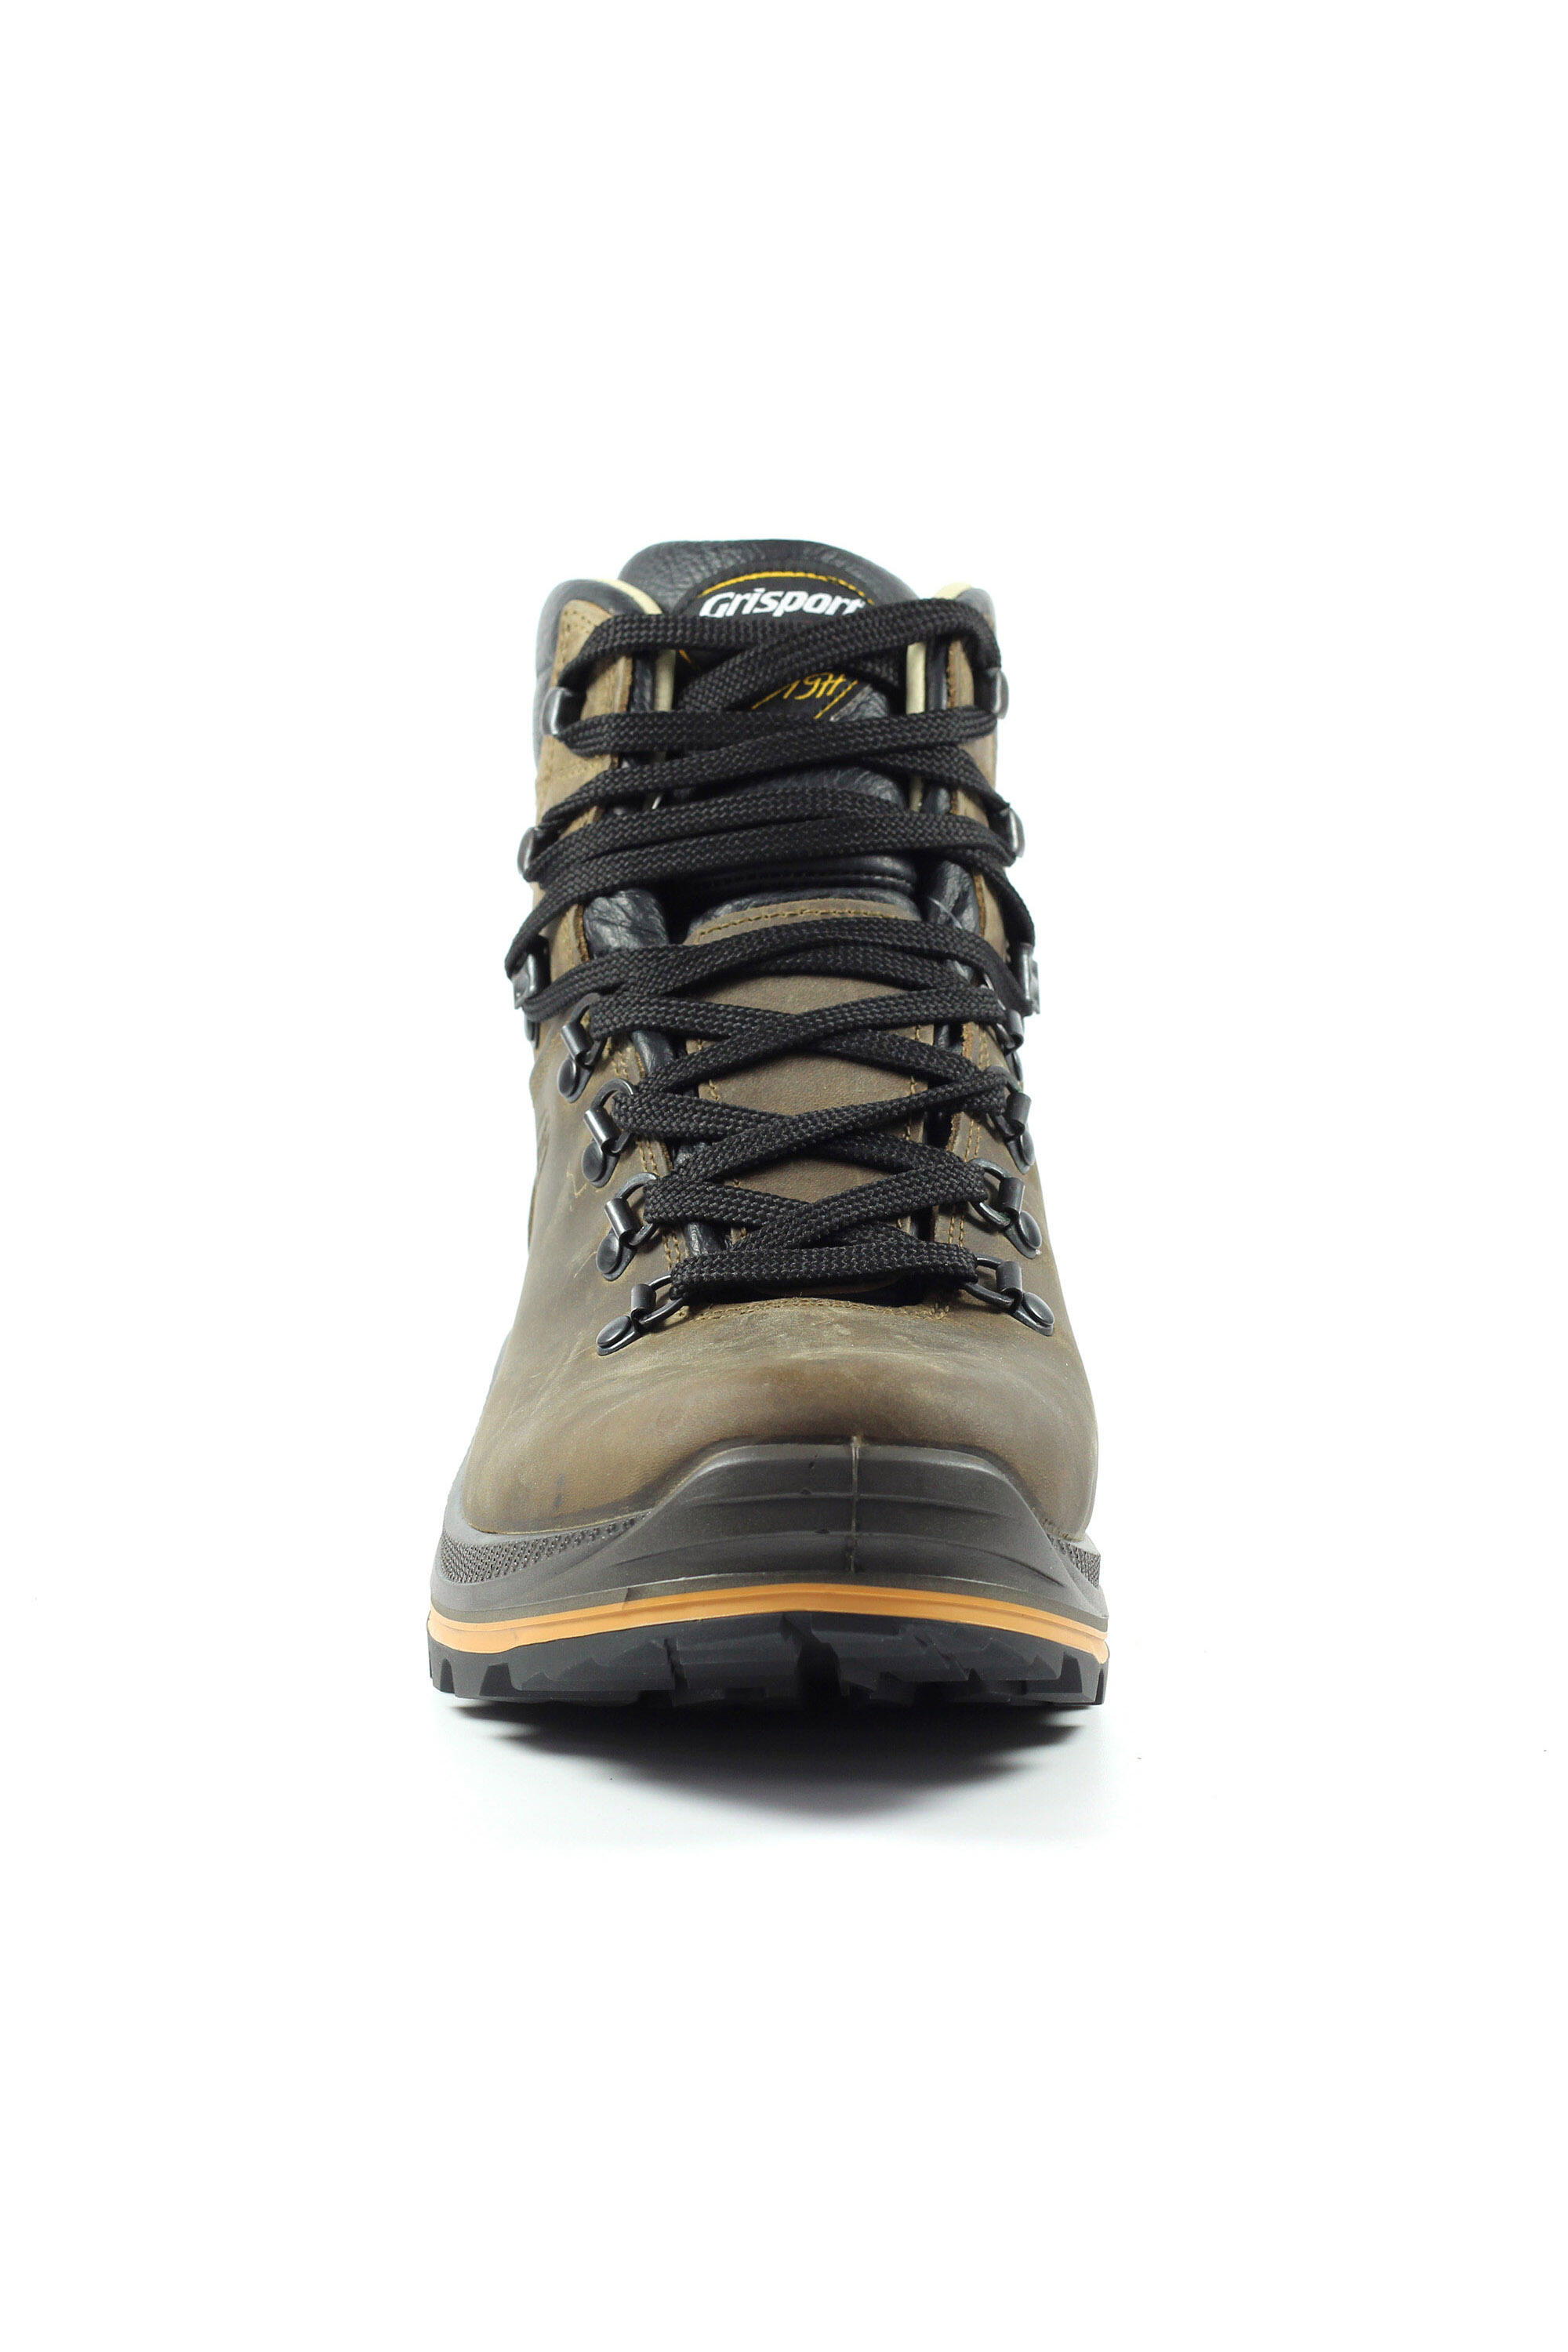 Aztec Crazy Horse Wide Fit Hiking Boot 4/5